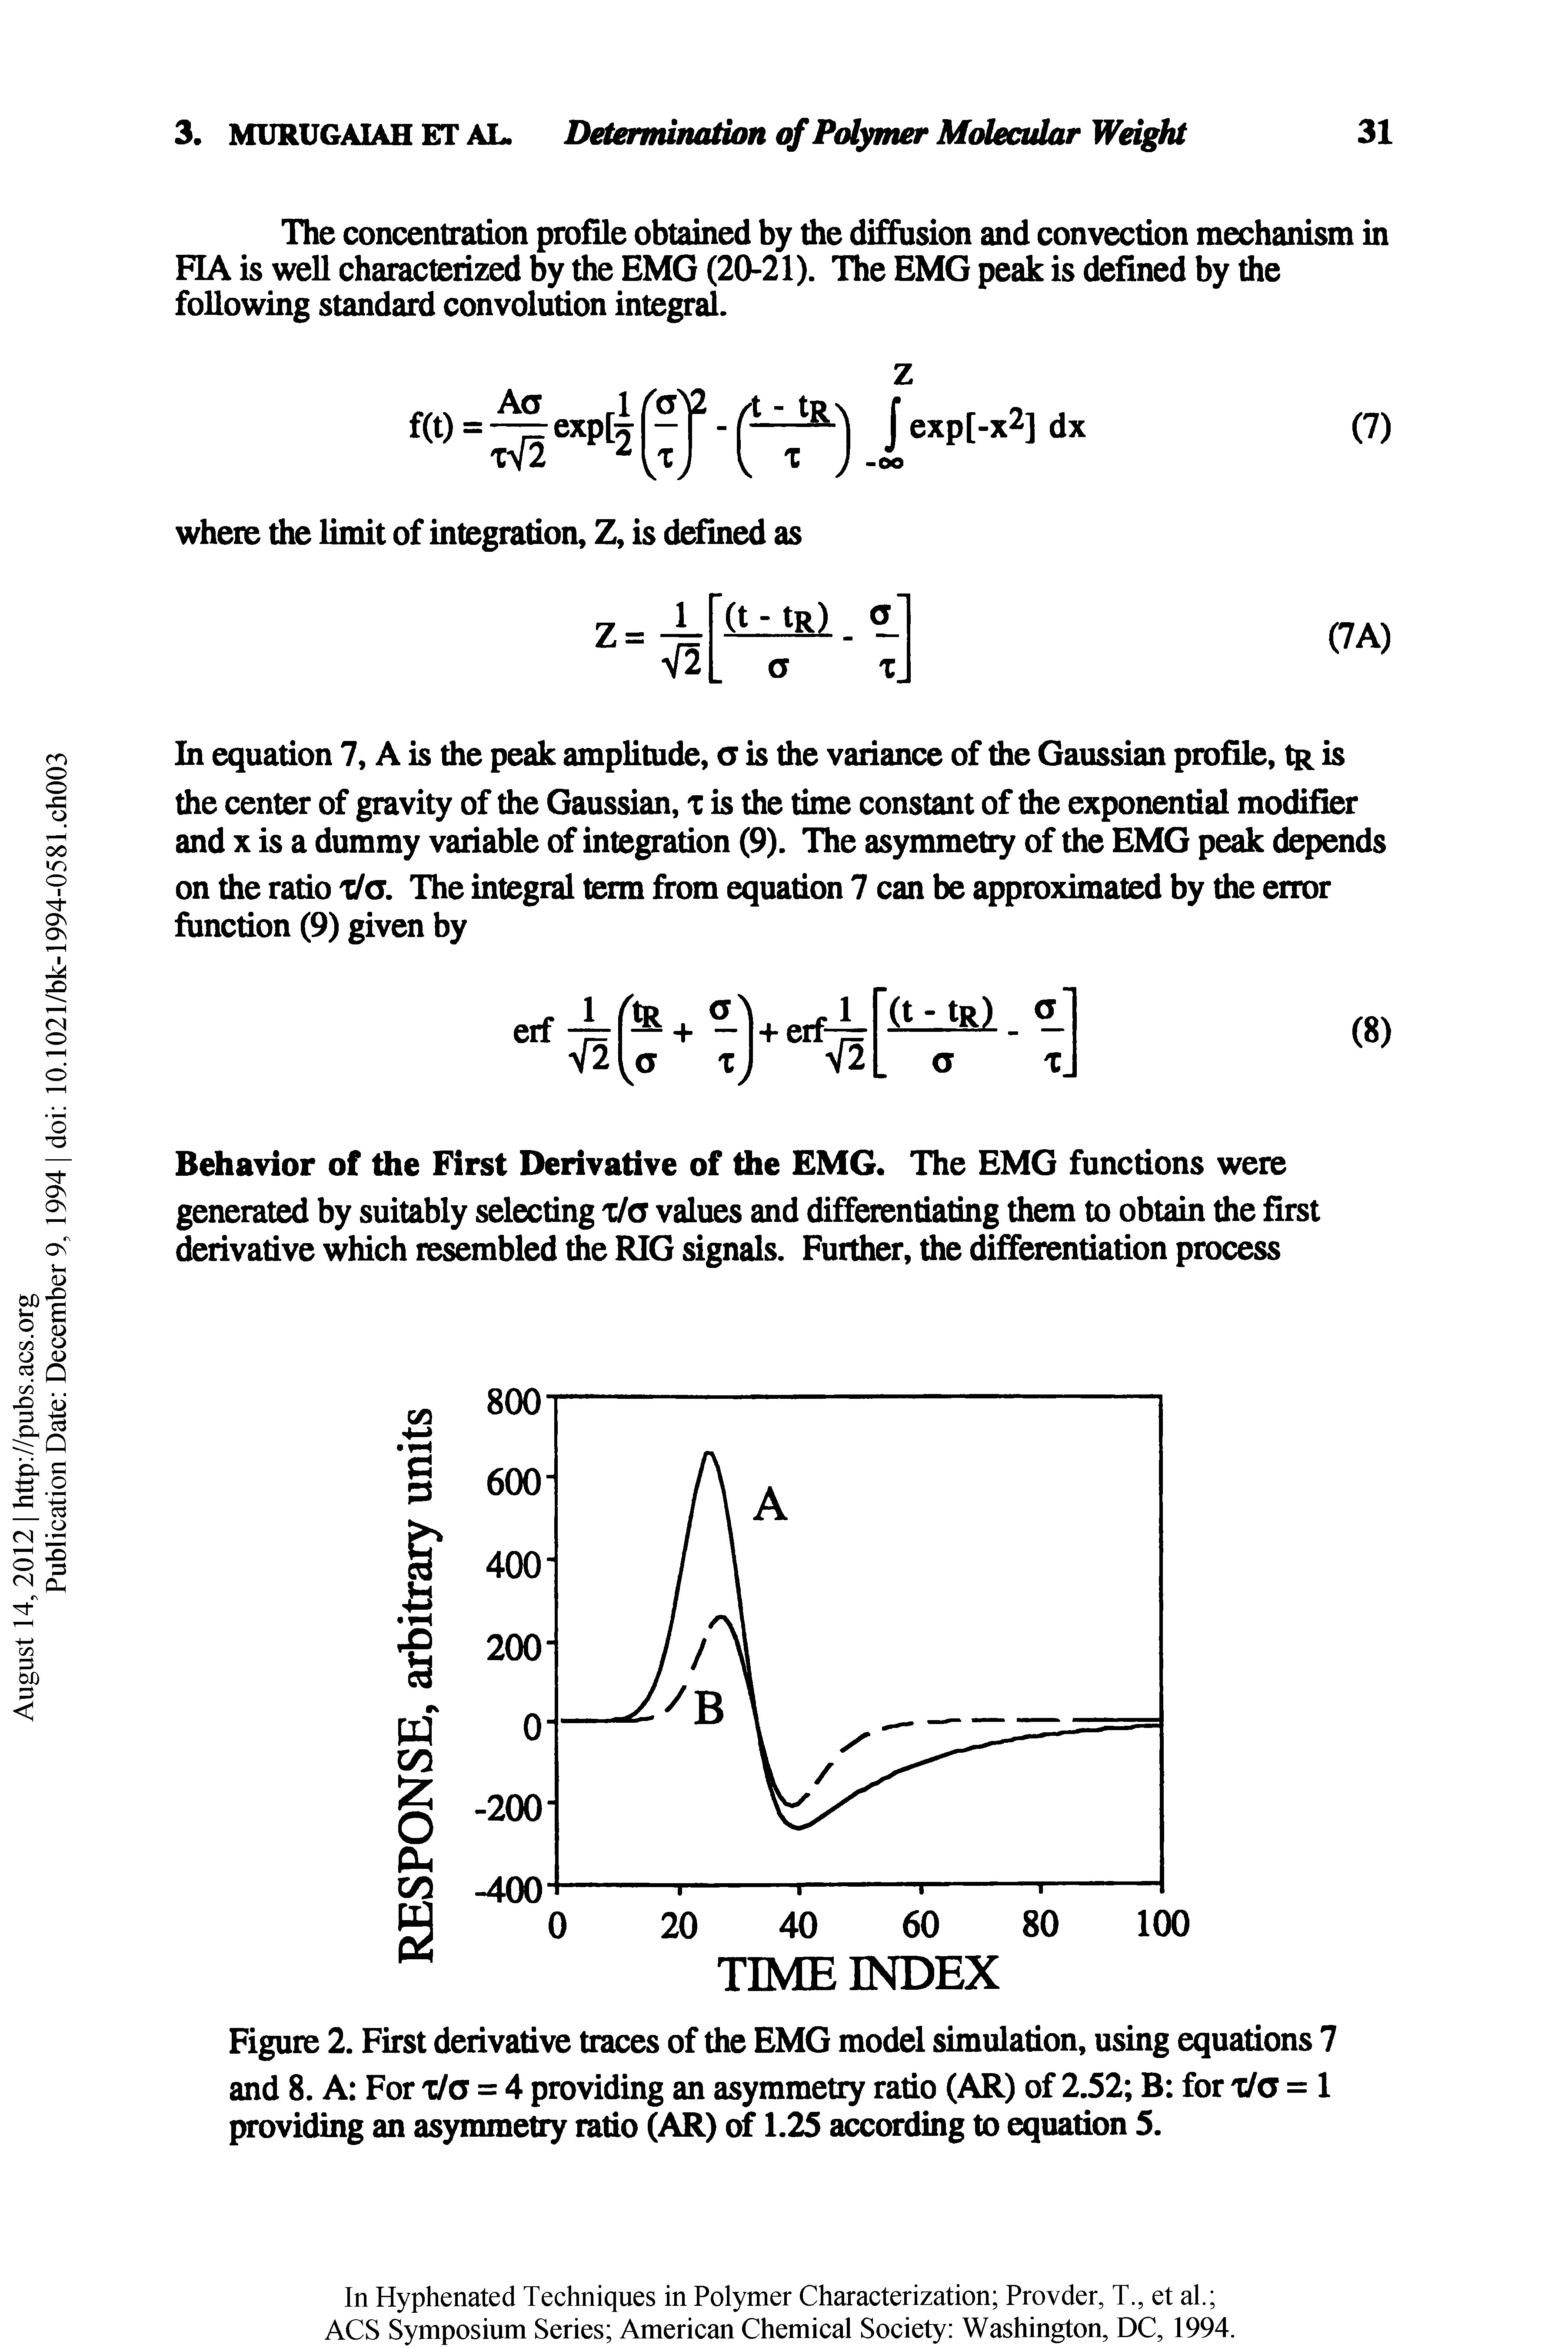 Figure 2. First derivative traces of the EMG model simulation, using equations 7 and 8. A For i/a = 4 providing an asymmetry ratio (AR) of 2.52 B for tie = 1 providing an asymmetry ratio (AR) of 1.25 according to equation 5.